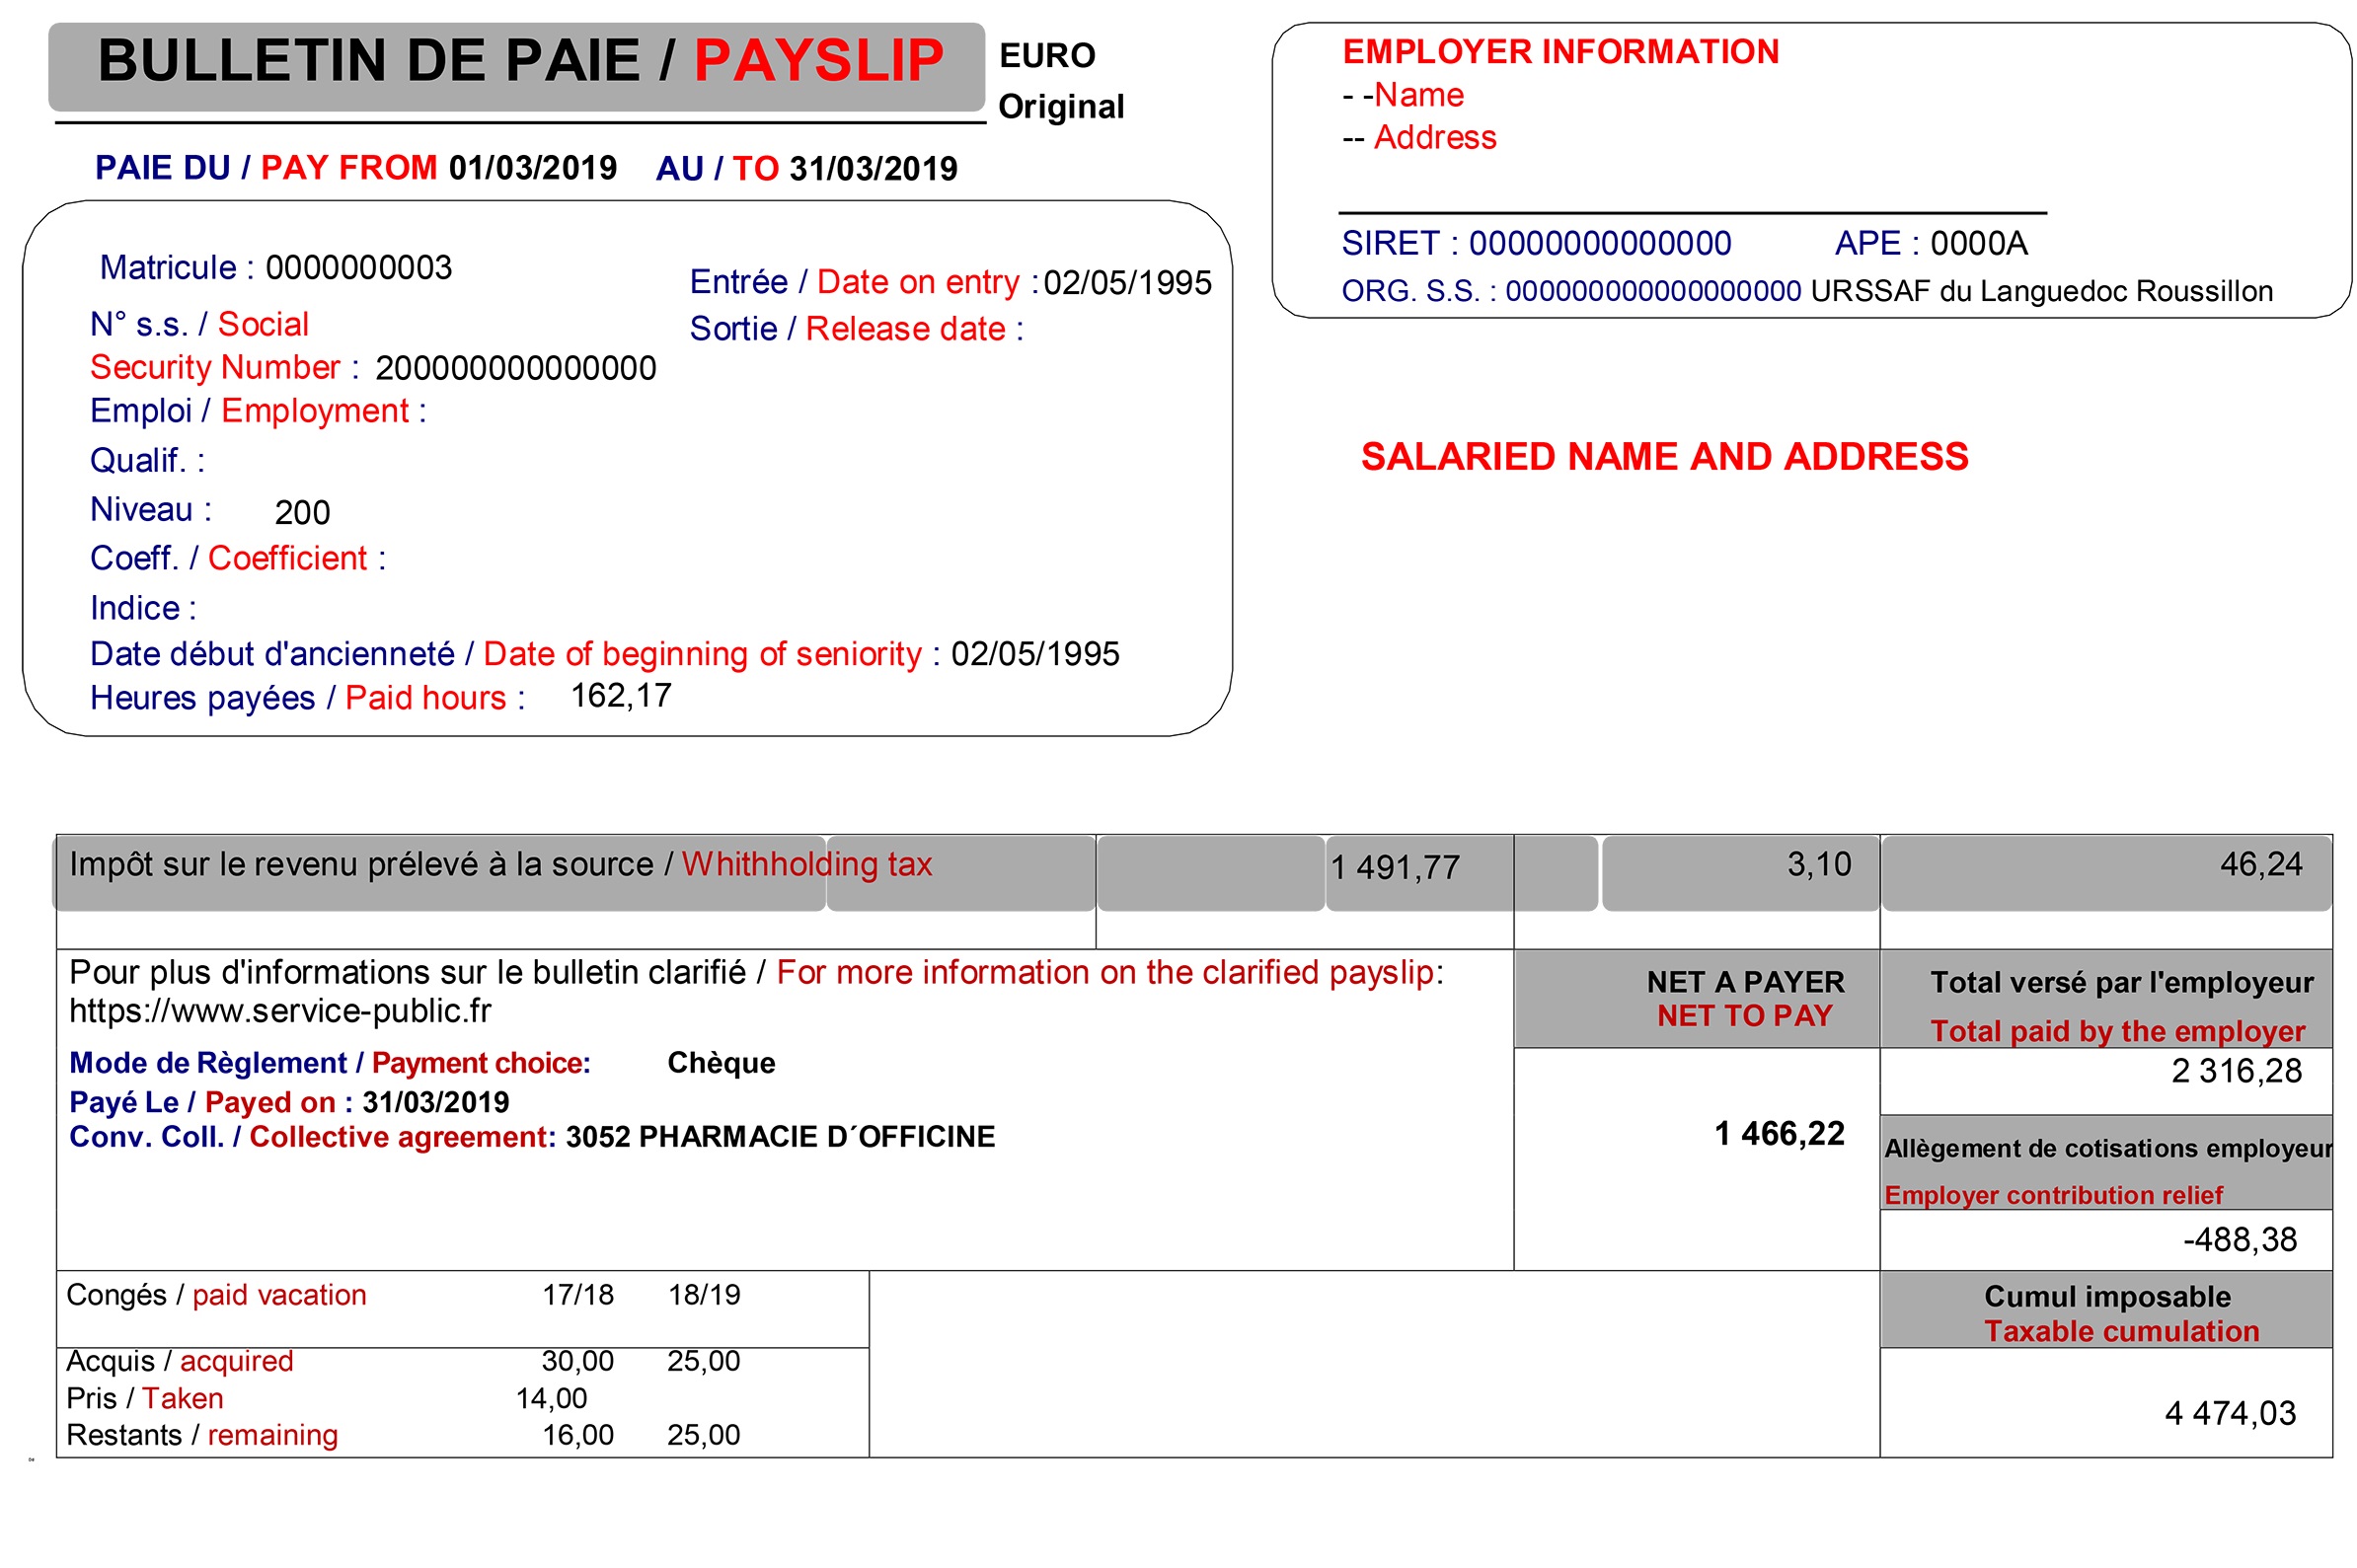 French payslip translated into English 2